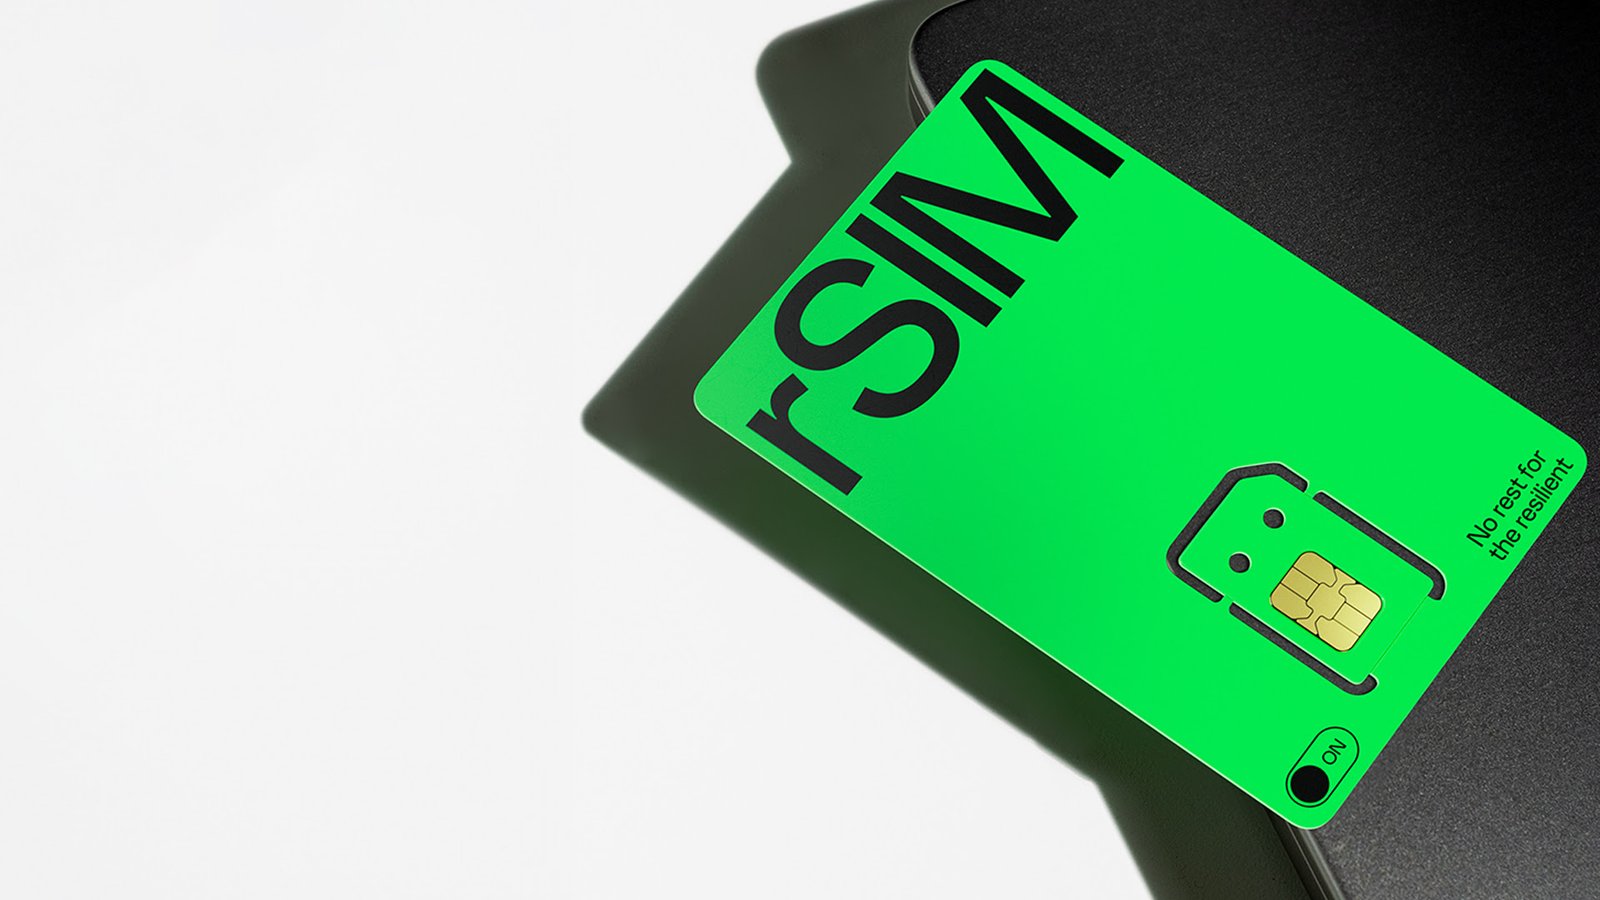 rSIM lets you use a ‘backup’ SIM on your SIM card